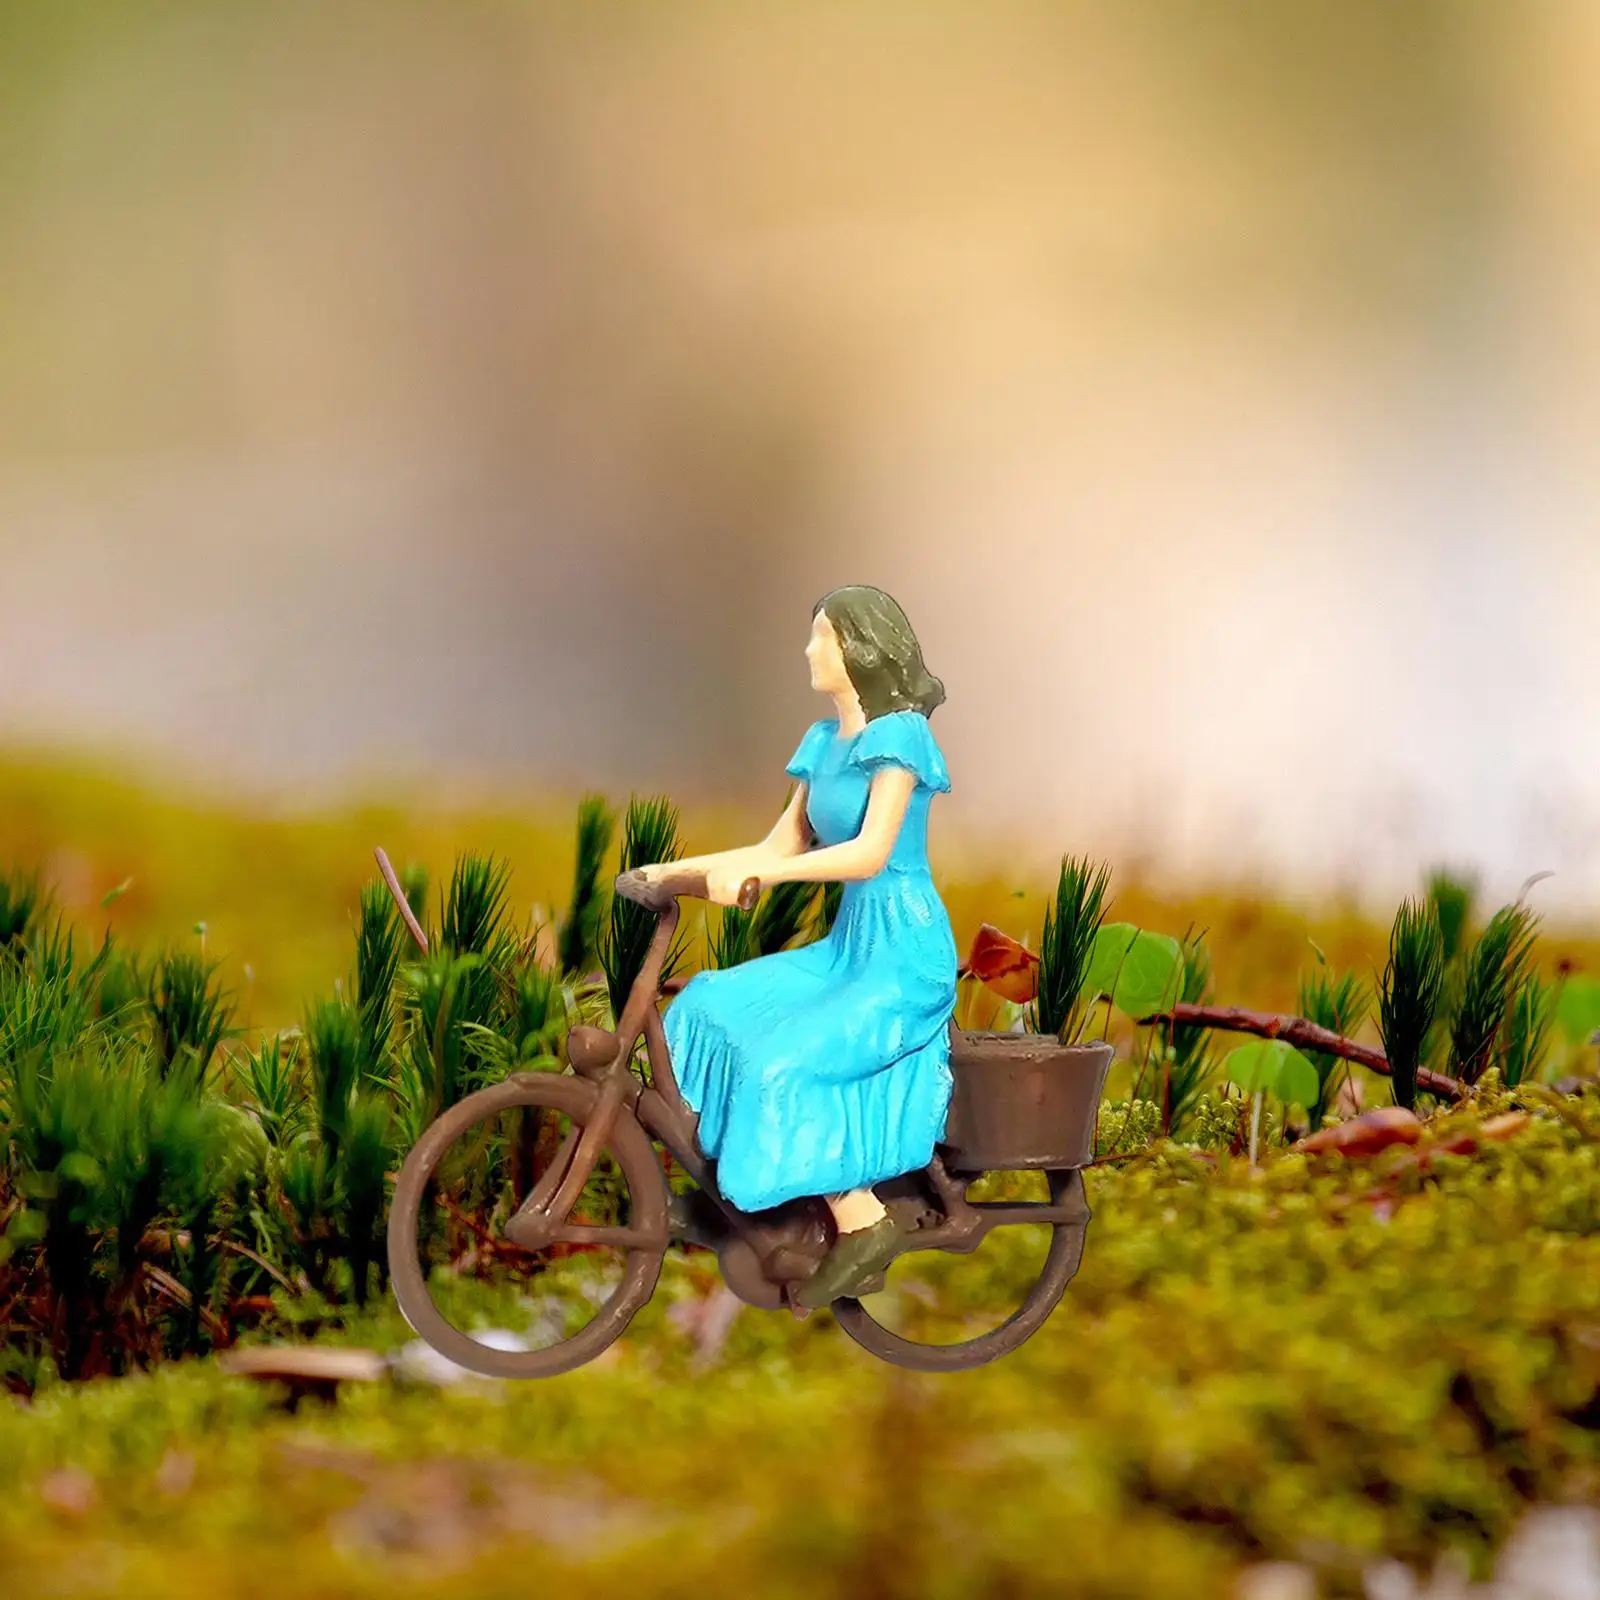 Realistic 1/87 Scale Cyclist Figurine Ornament for Diorama Layout Decoration